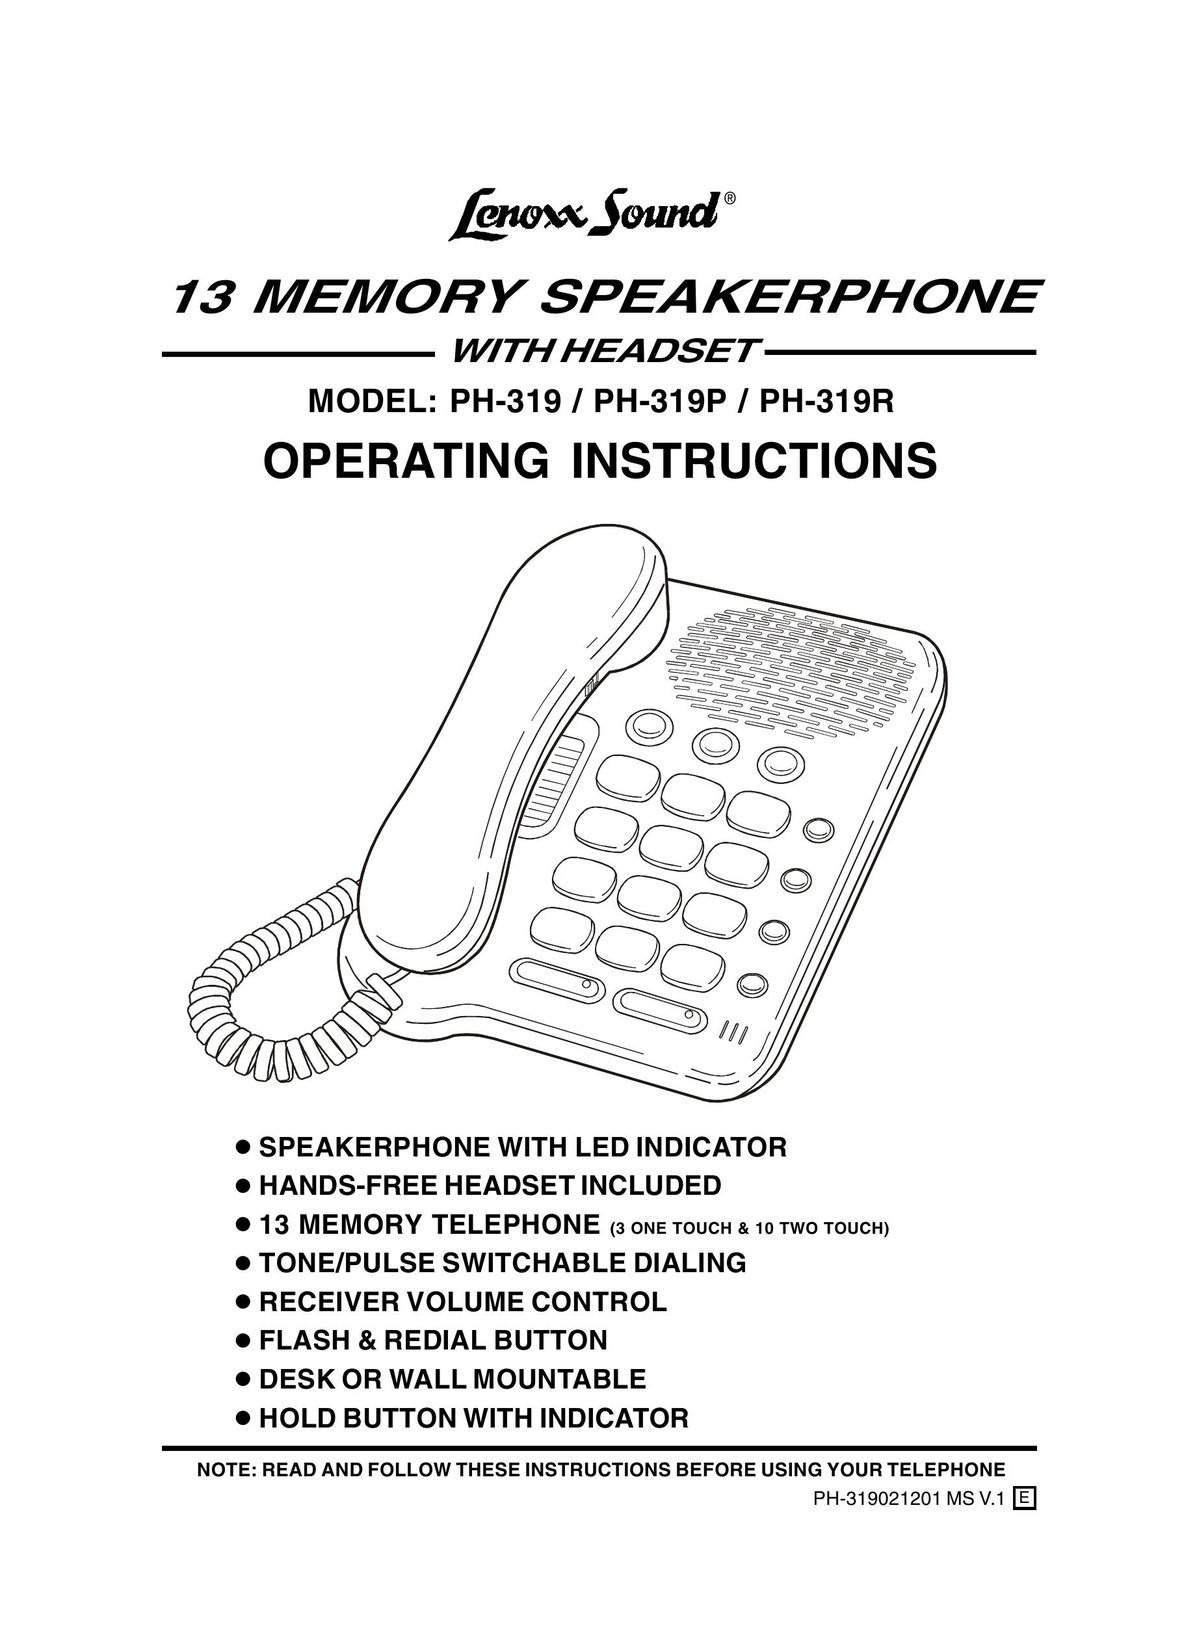 Lenoxx Electronics PH-319 Conference Phone User Manual